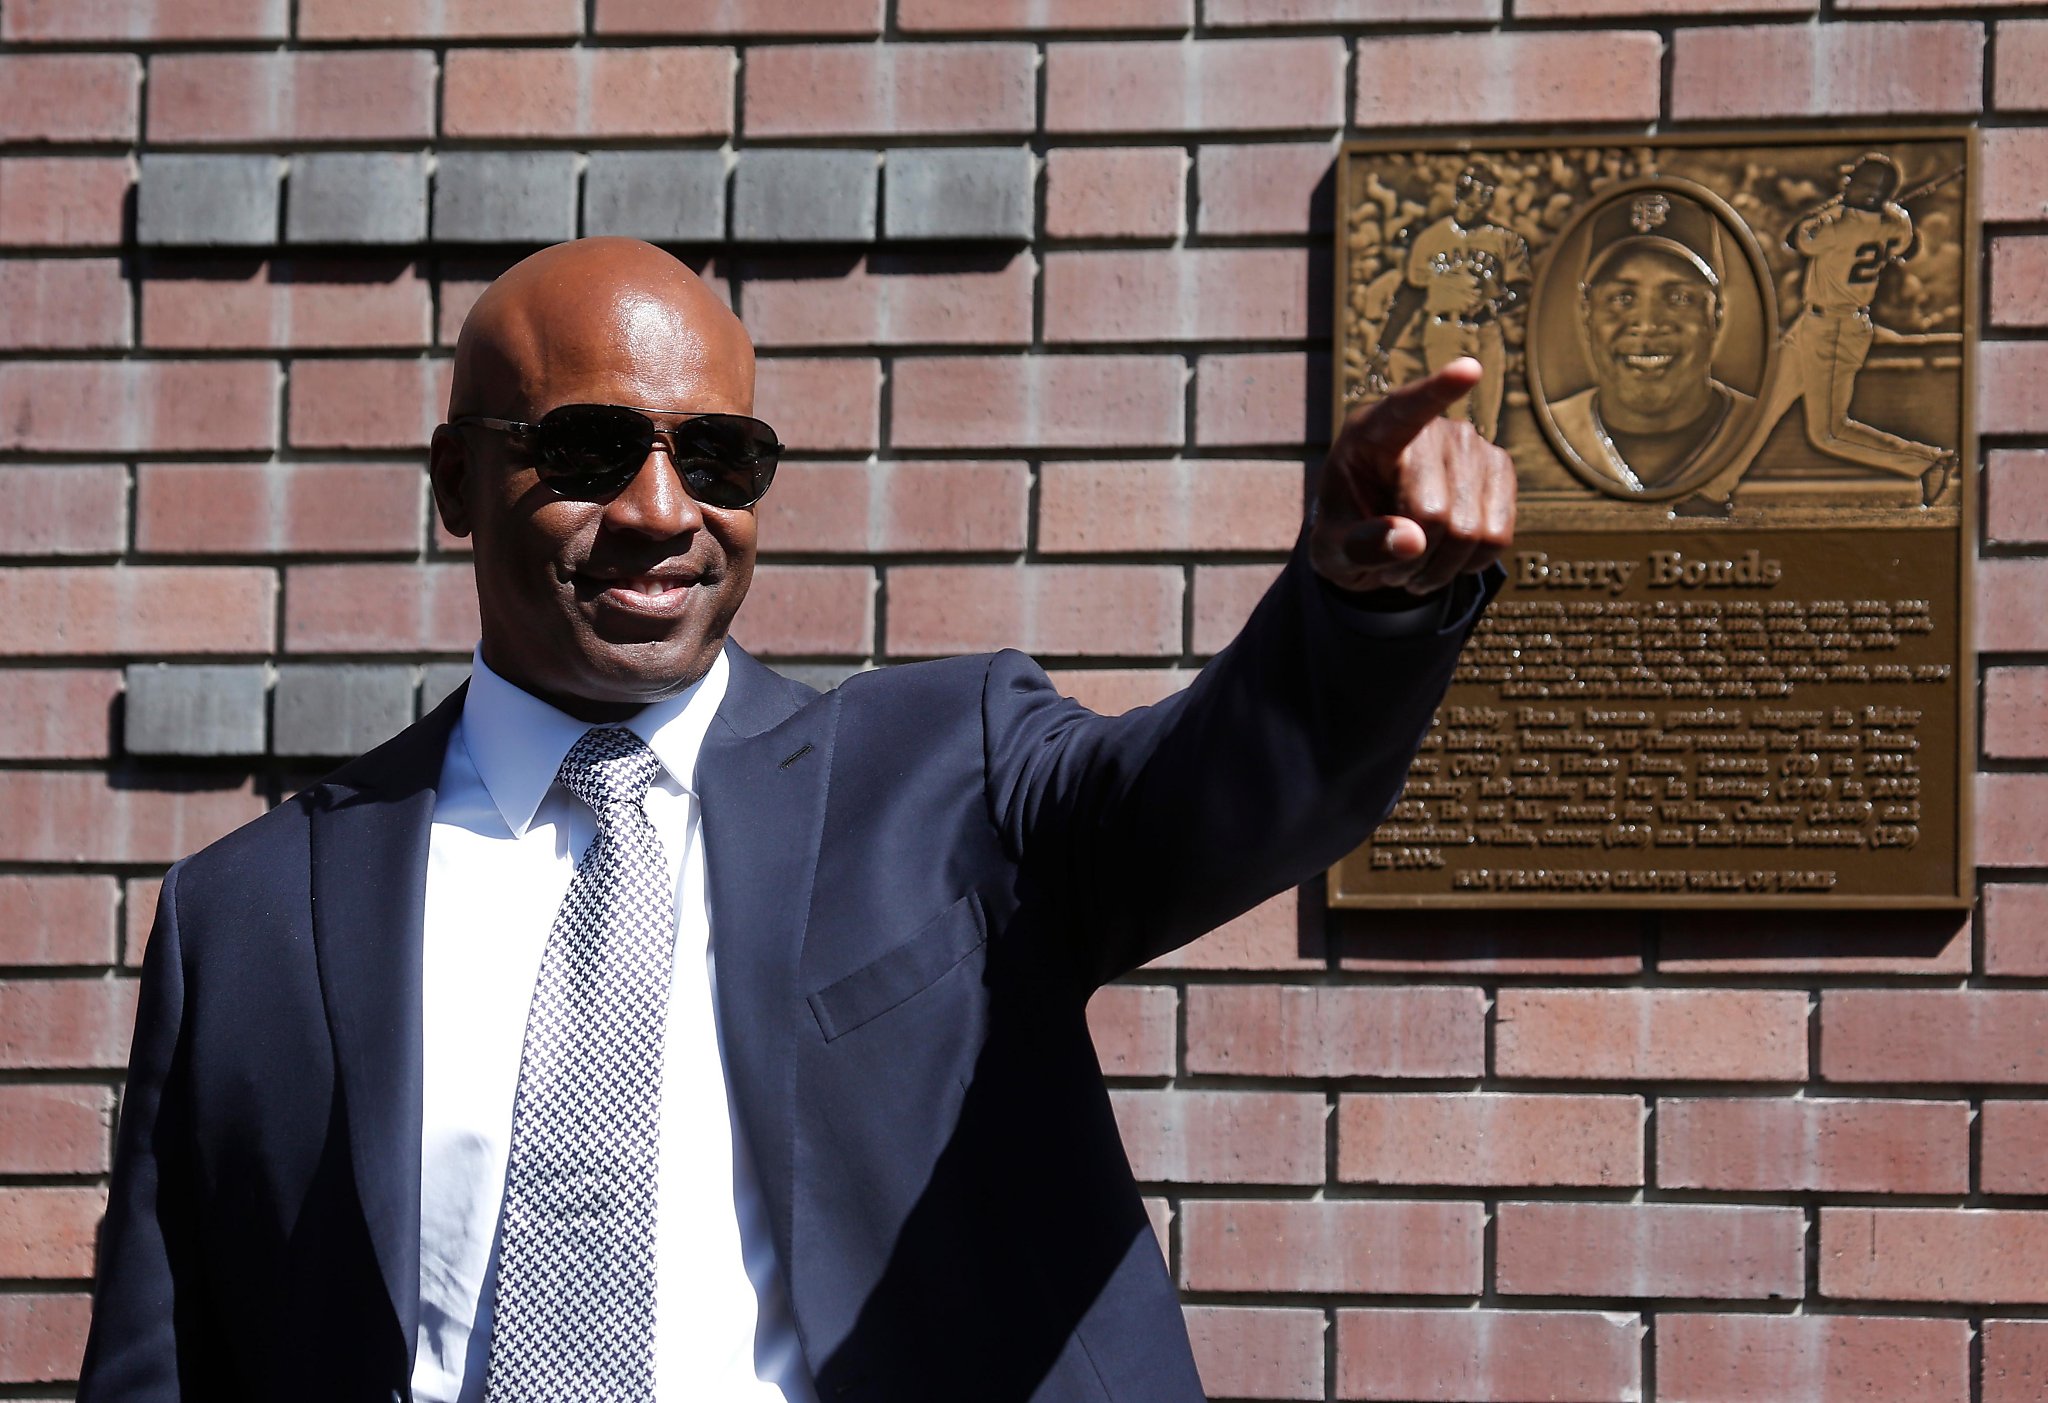 Barry Bonds' obstruction of justice conviction overturned - Los Angeles  Times